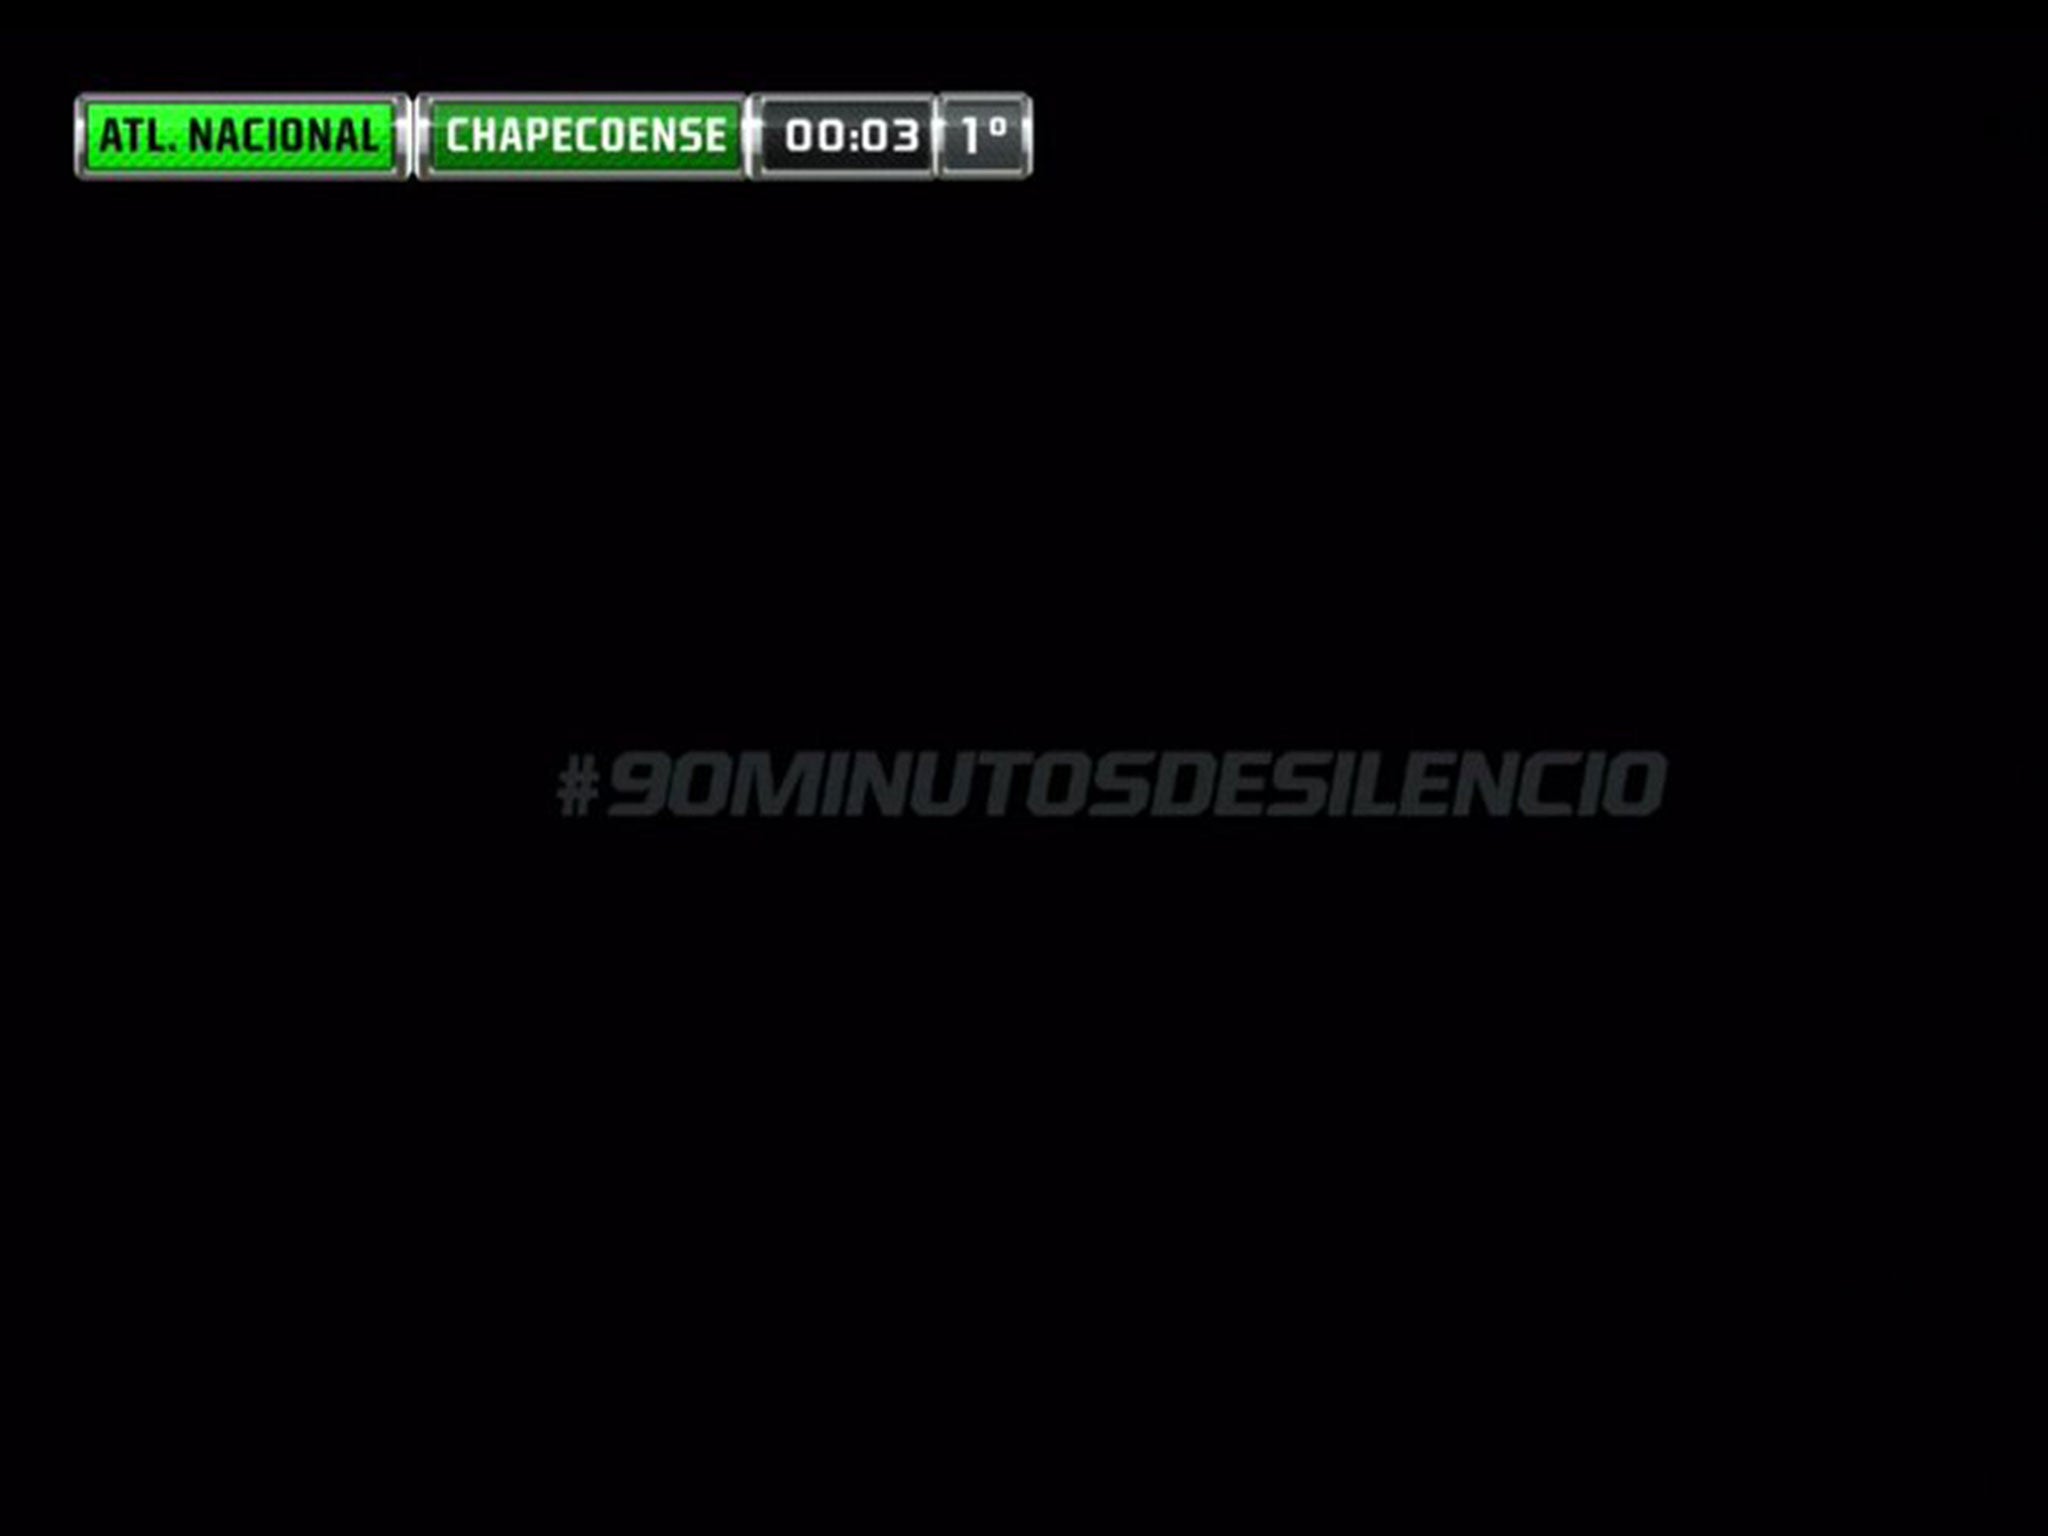 The message shown during the broadcast on Fox Sports Brasil